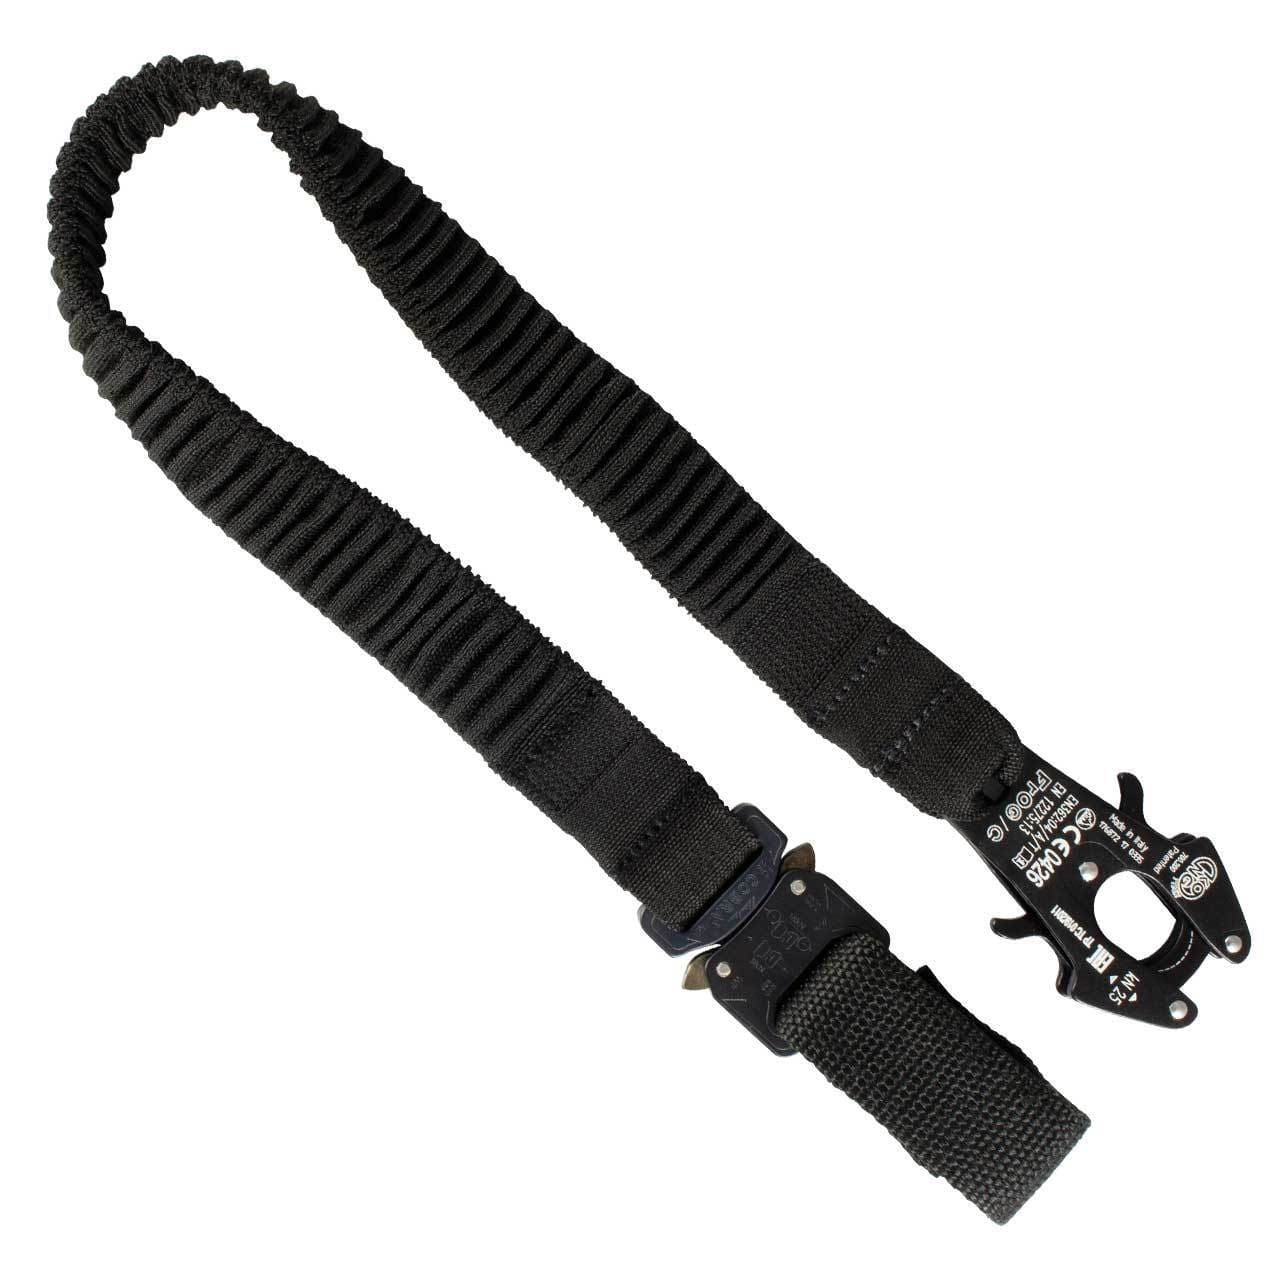 United States Tactical Tactical Gear Black United States Tactical Shock Webbing Hip Lead with Frog Clamp - New Style